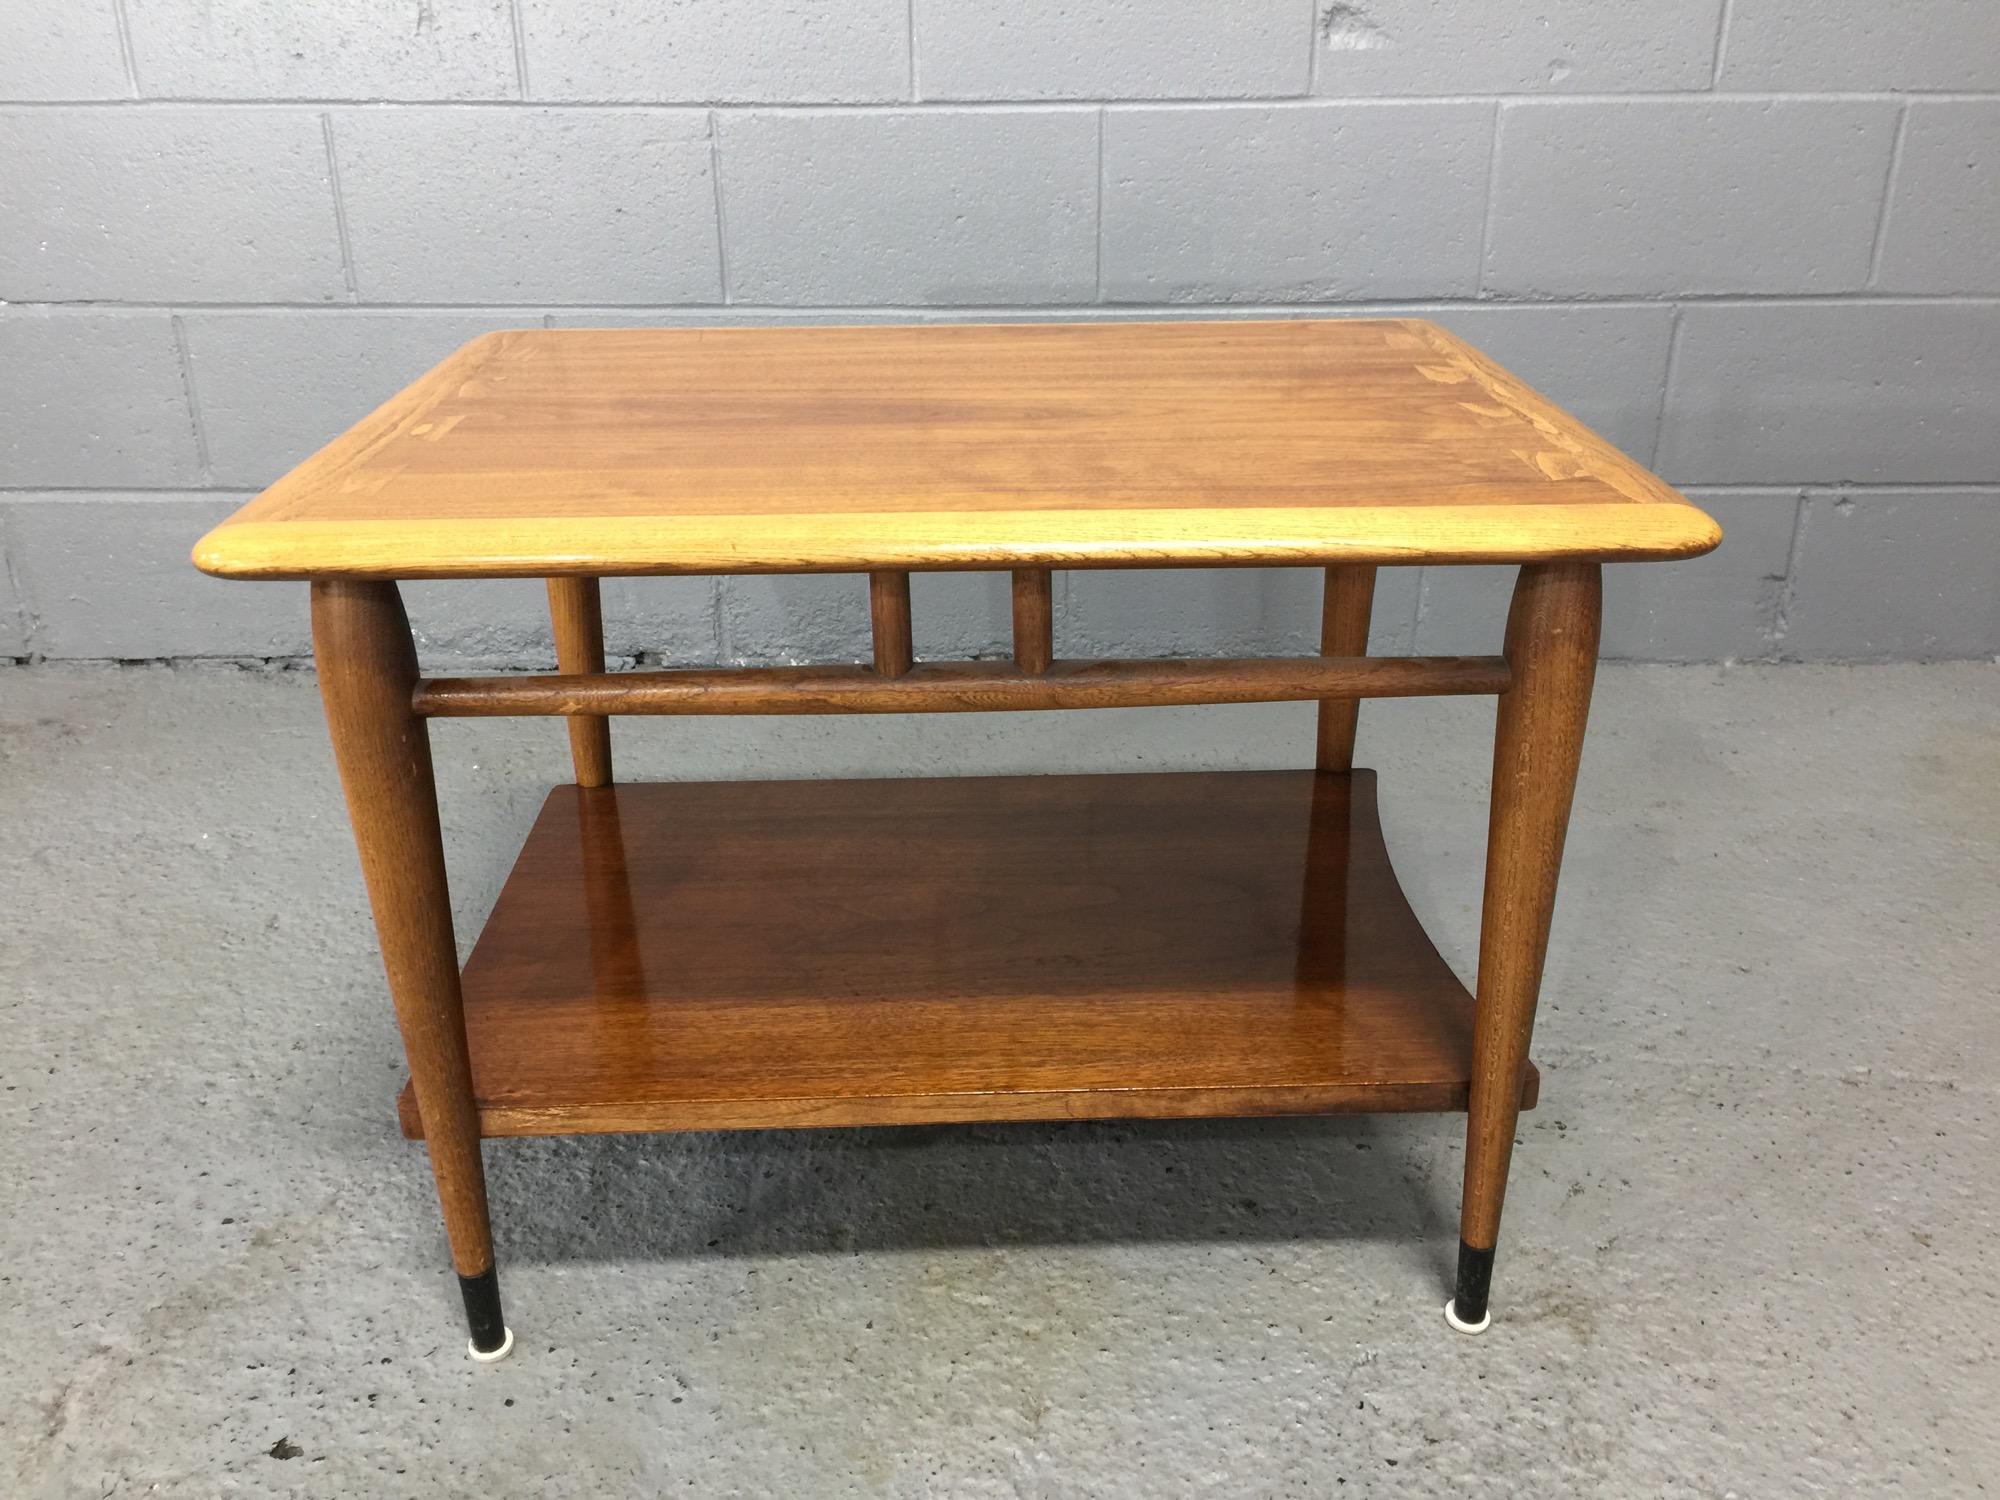 Mid-Century Modern Acclaim Series Side Table with Shelf by Andre Bus for Lane